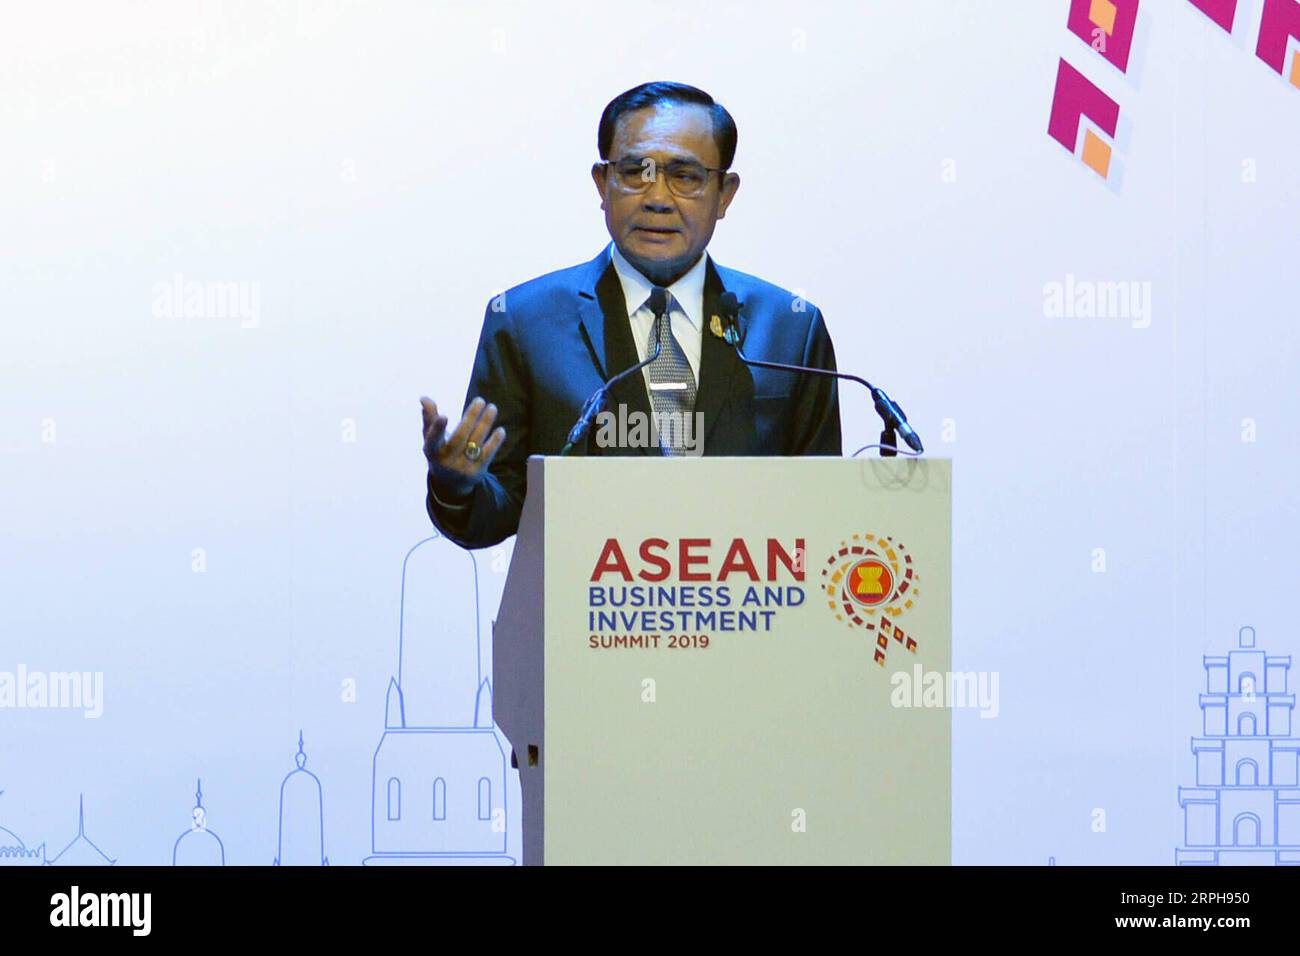 191102 -- BANGKOK, Nov. 2, 2019 Xinhua -- Thai Prime Minister Prayuth Chan-ocha delivers a speech at the Association of Southeast Asian Nations ASEAN Business and Investment Summit ABIS 2019 in Bangkok, Thailand, Nov. 2, 2019. Xinhua/Rachen Sageamsak THAILAND-BANGKOK-ASEAN-ABIS PUBLICATIONxNOTxINxCHN Stock Photo